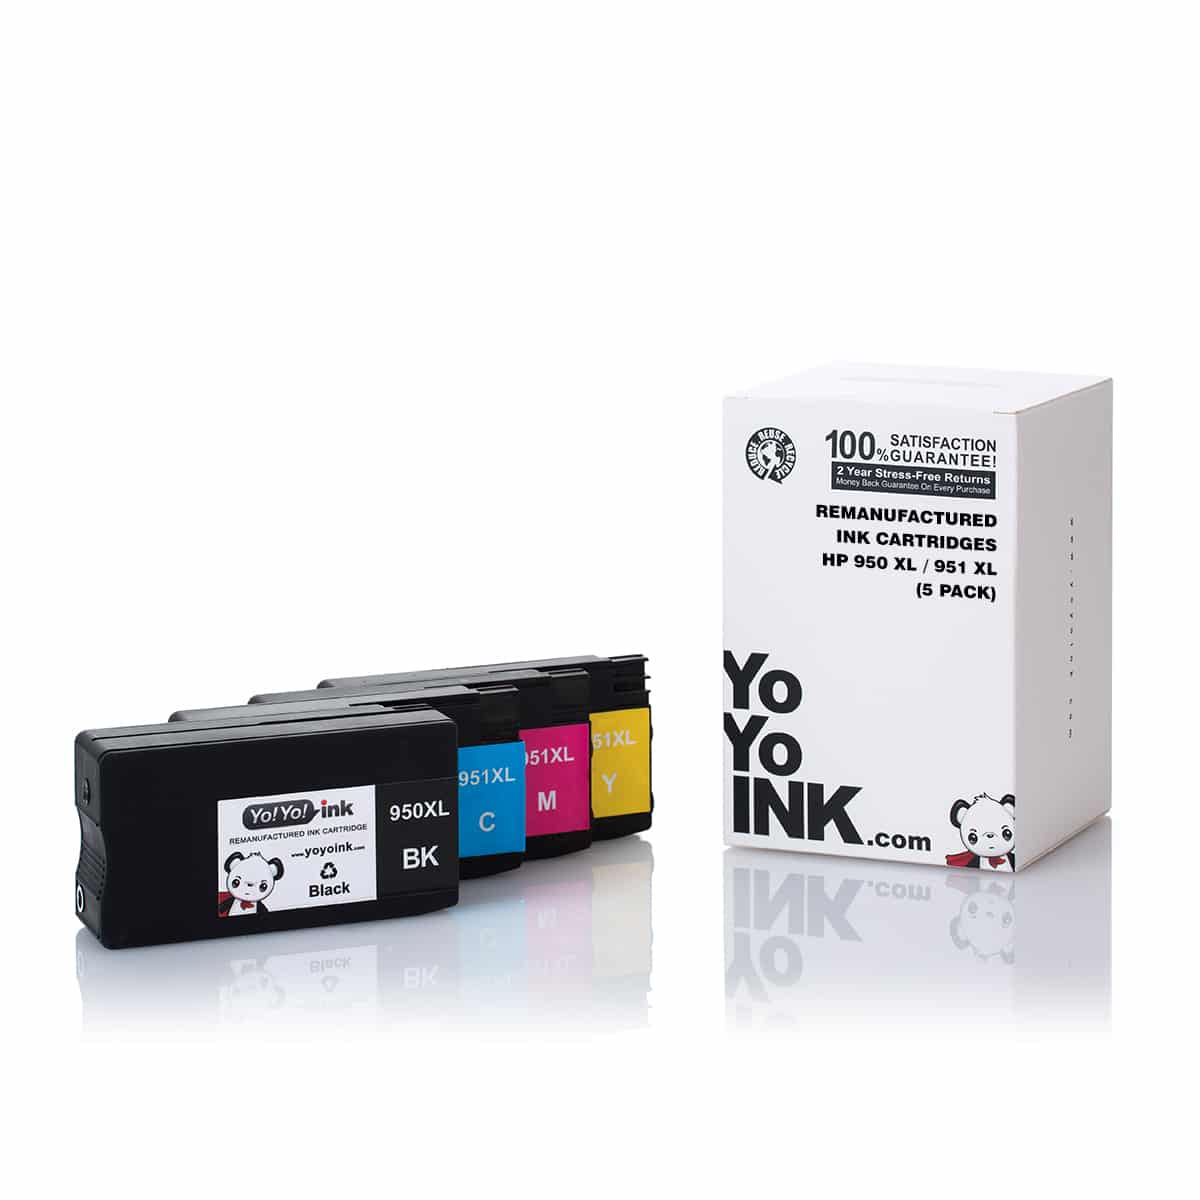 HP 950XL 951XL Ink Cartridge Combo Pack, Remanufactured High Yield - 4-Pack (1 Black, 1 Cyan, 1 Mage